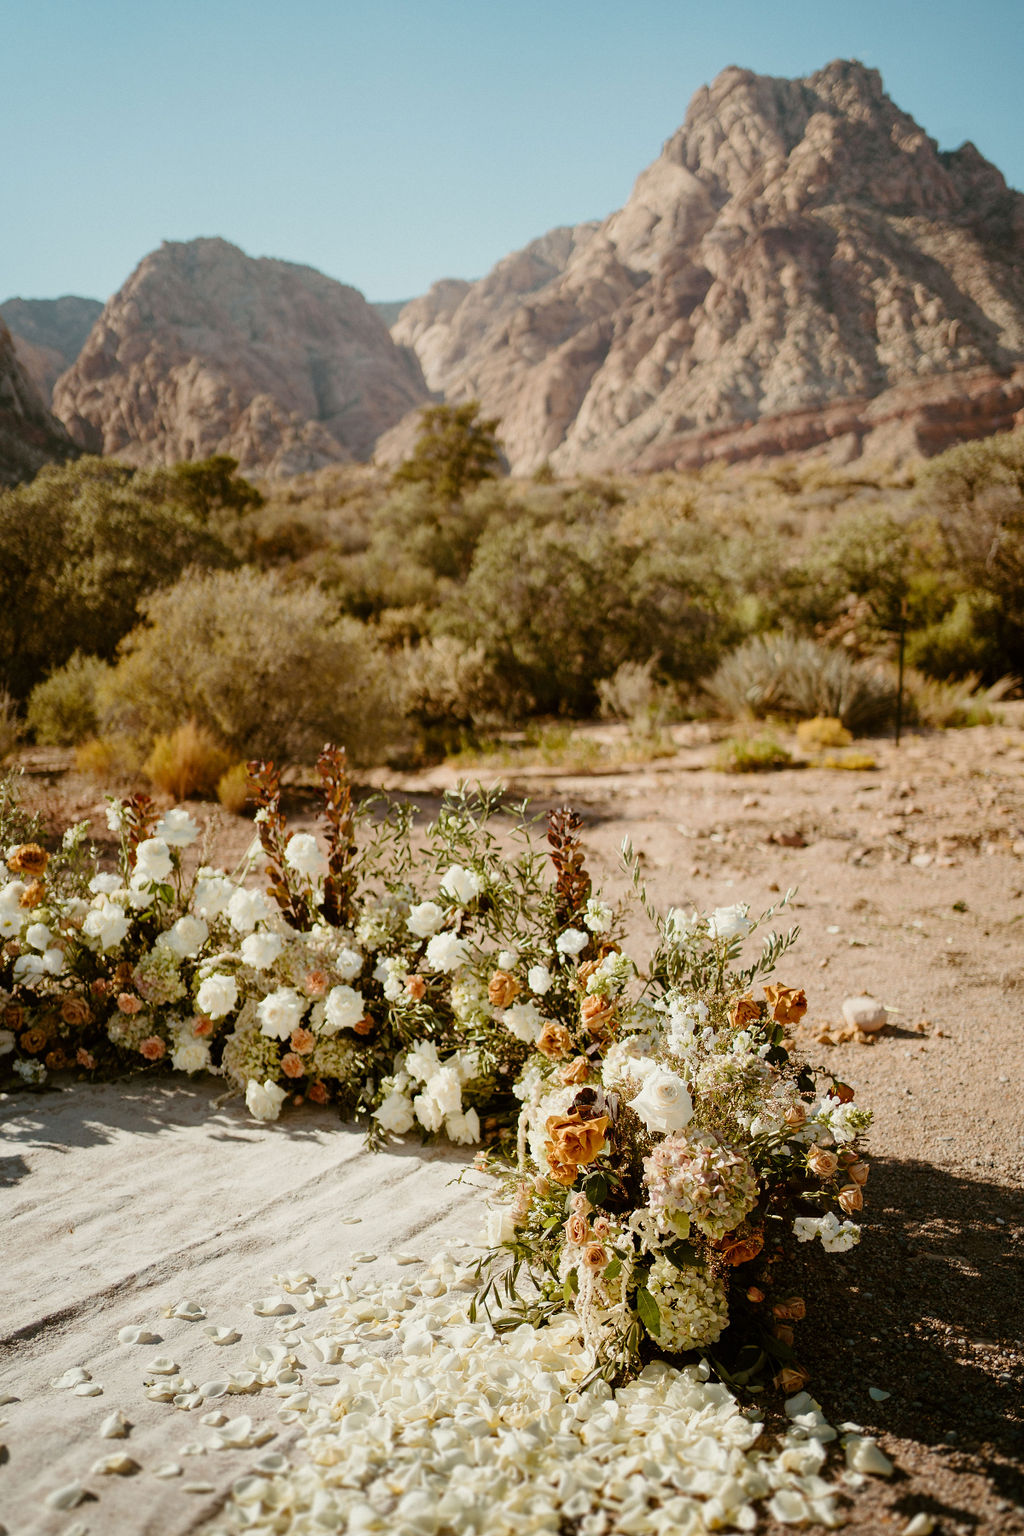 Floral wedding arch with white petals on the ground, set against a backdrop of rugged mountains and sparse desert vegetation at Red Rock Canyon